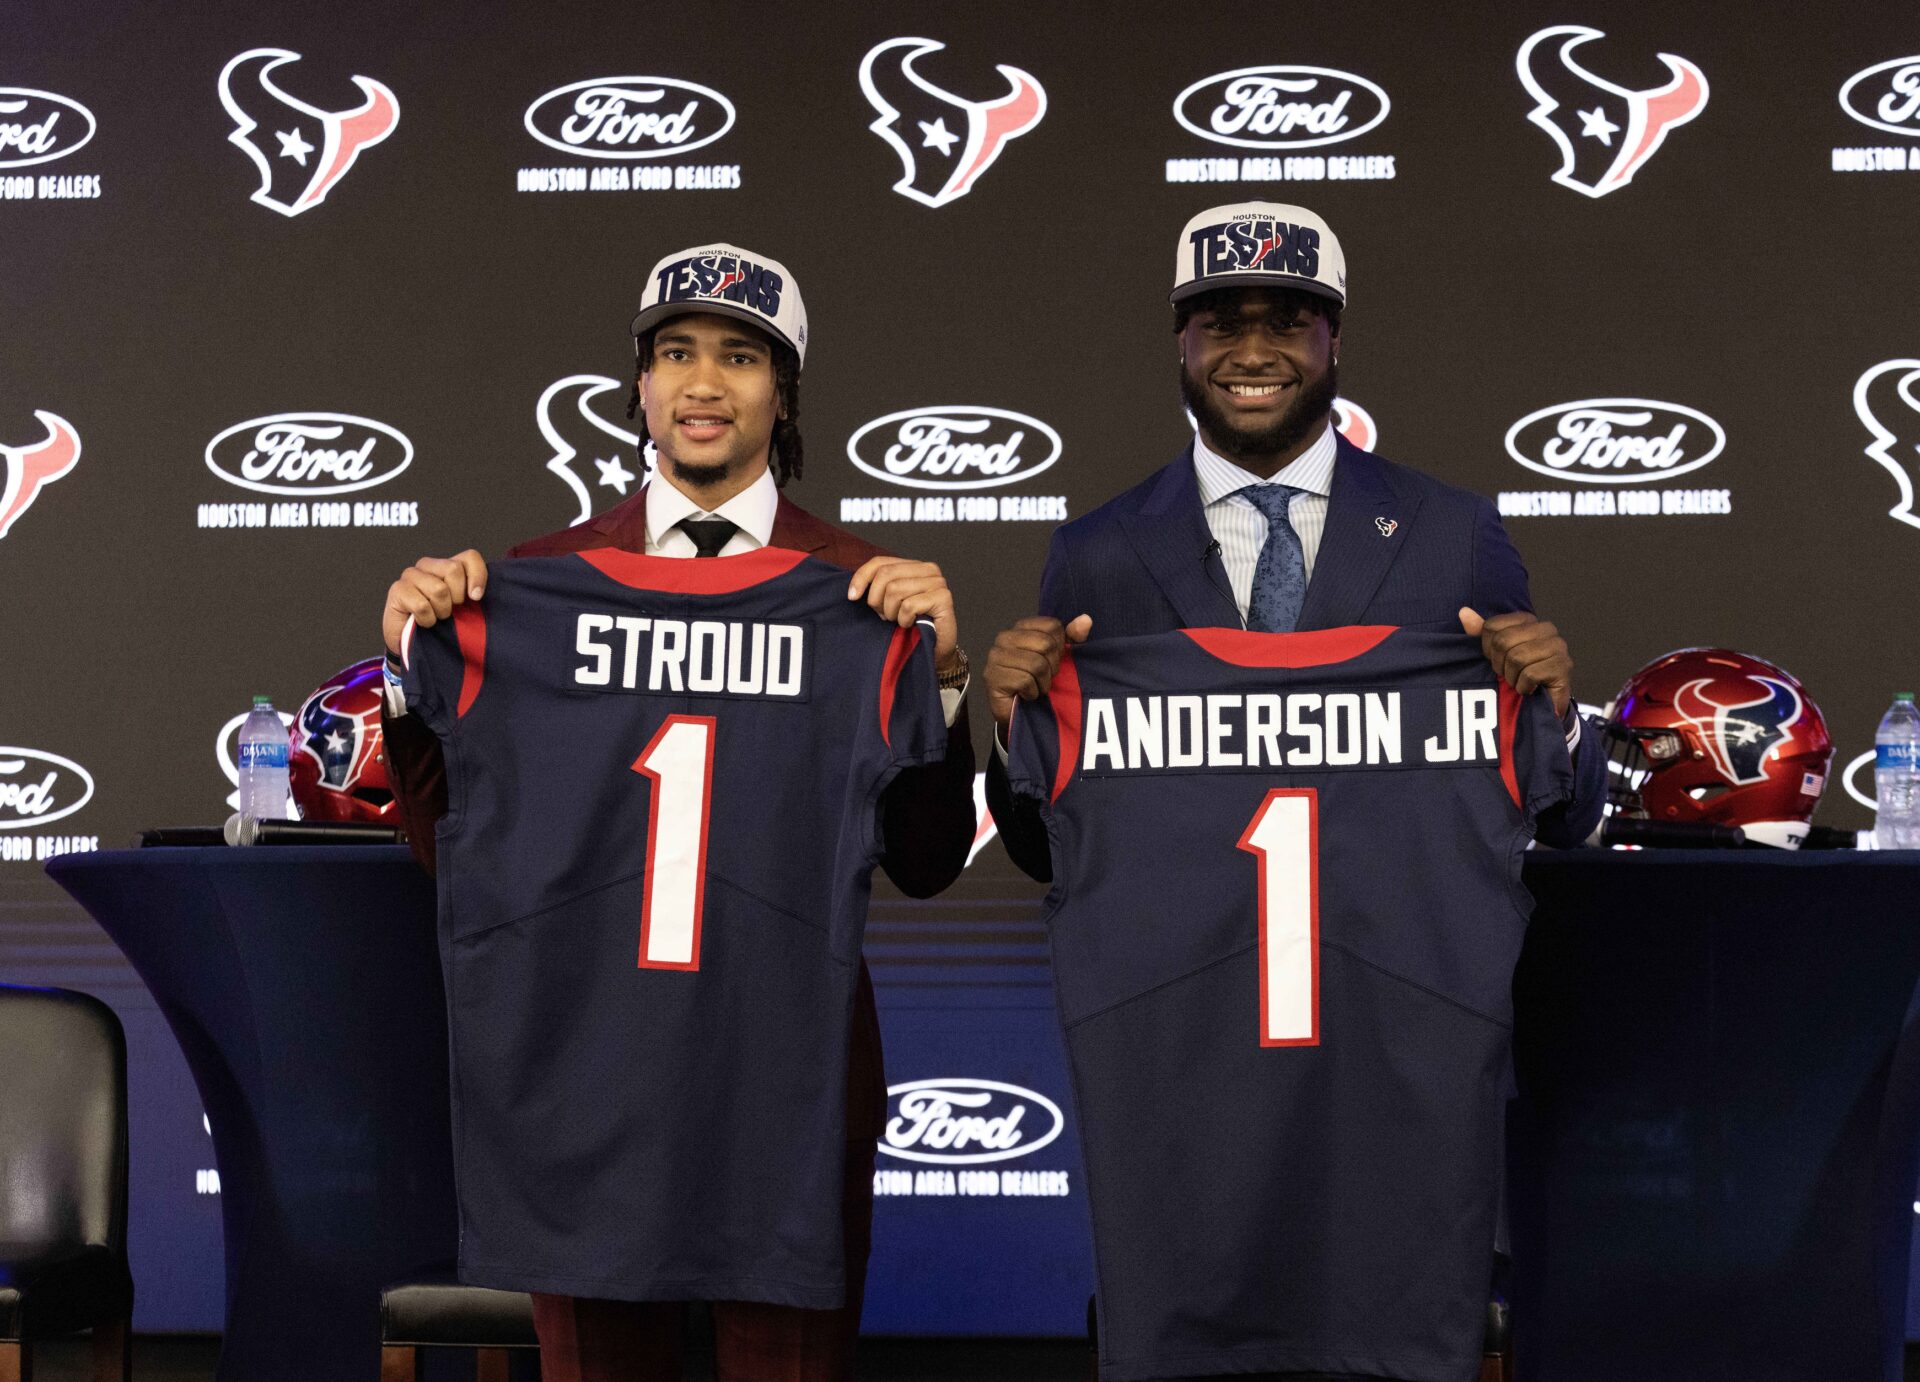 From left to right, Houston Texans quarterback CJ Stroud (left), second overall pick in the 2023 NFL Draft, and Texans linebacker Will Anderson Jr., third overall pick in the 2023 NFL Draft, pose for a photo at a press conference at NRG Stadium.